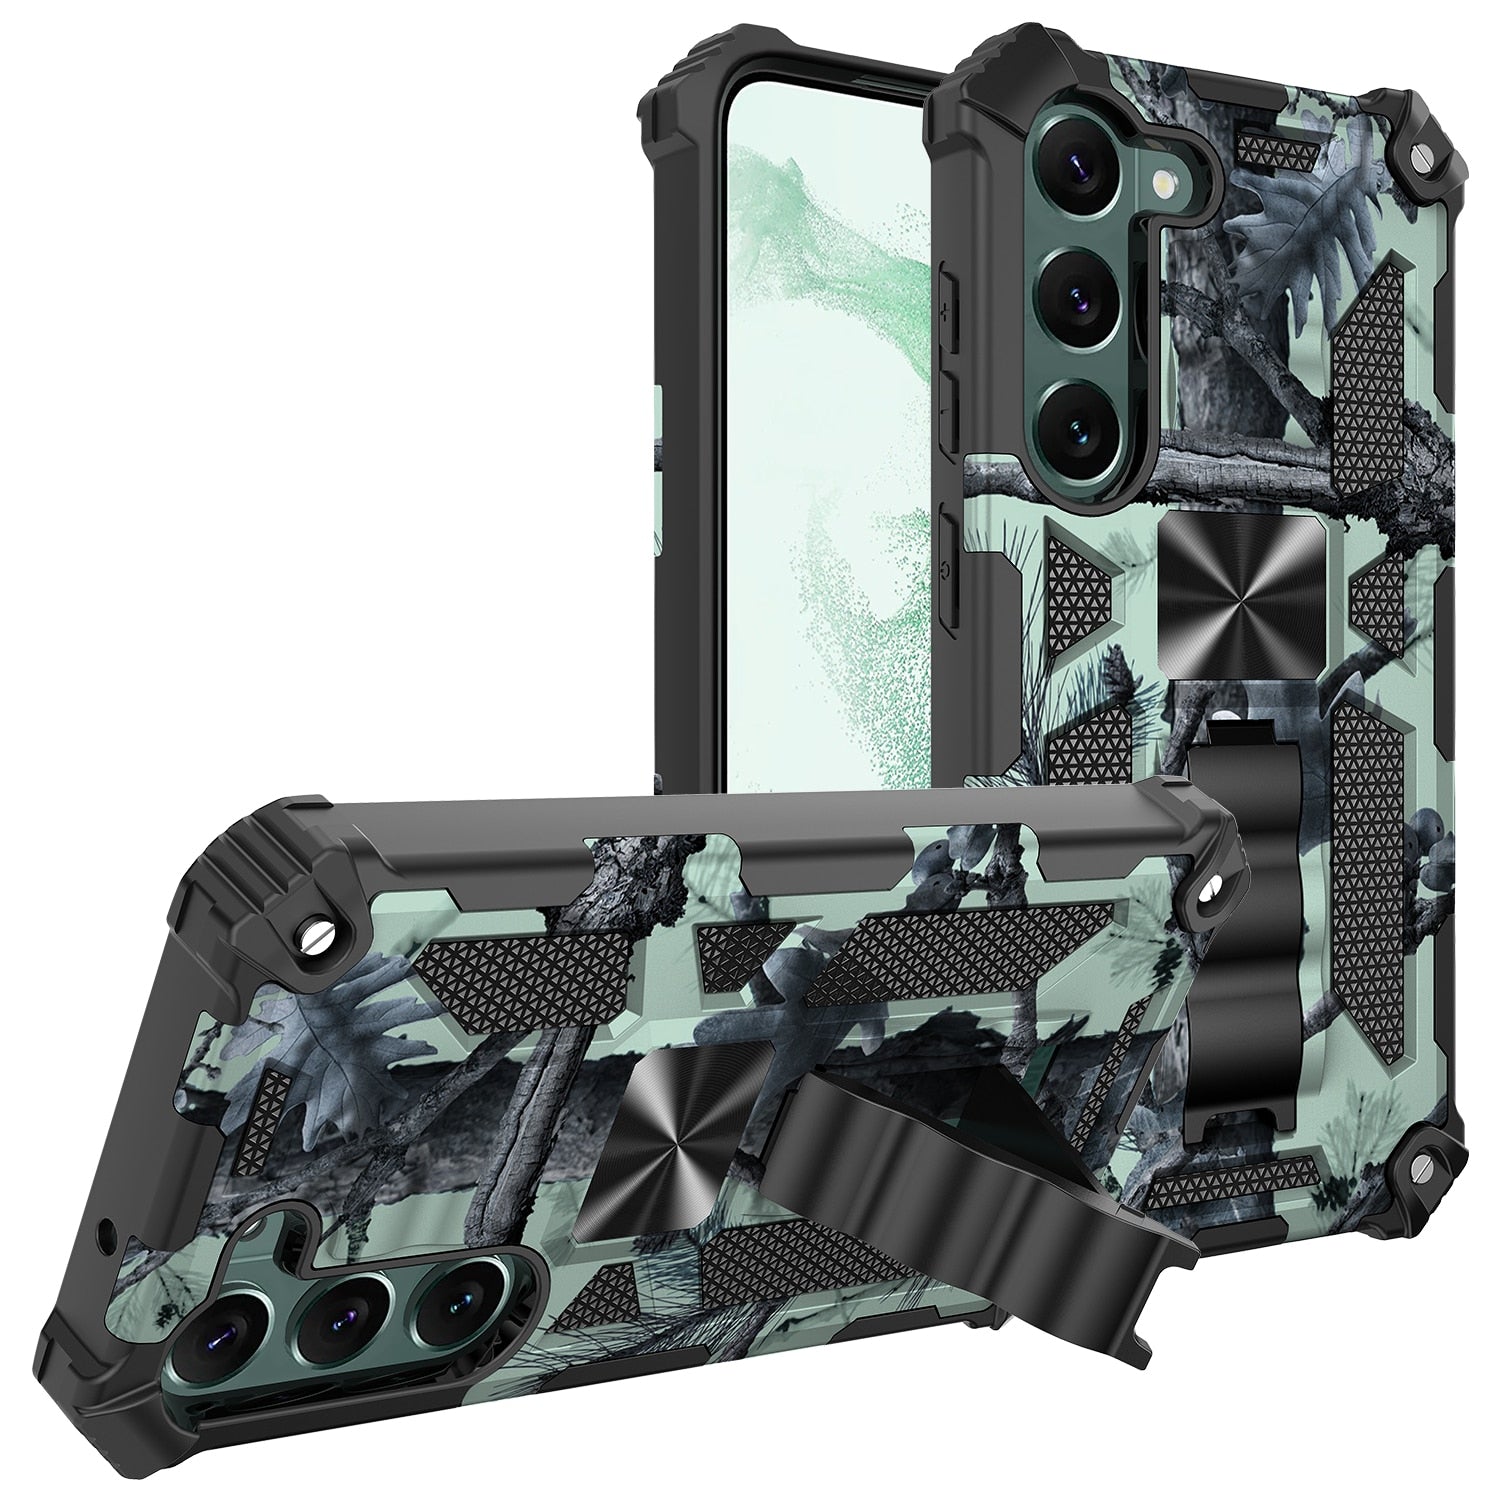 Armored Case-Dual Layer Protection